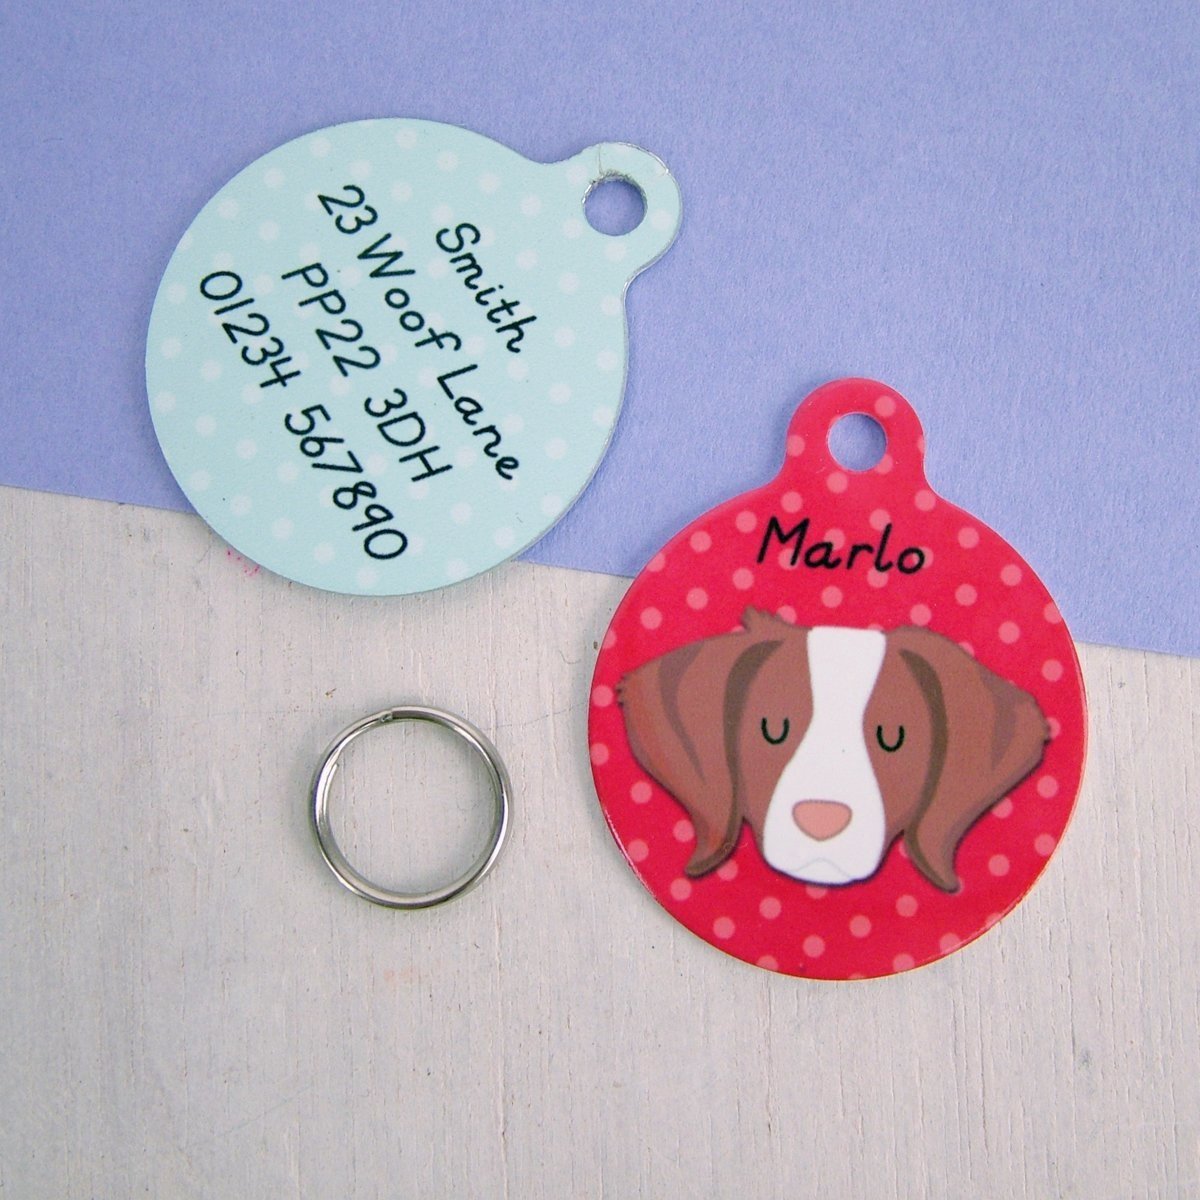 Brittany Dog ID Tag Personalised  - Hoobynoo - Personalised Pet Tags and Gifts